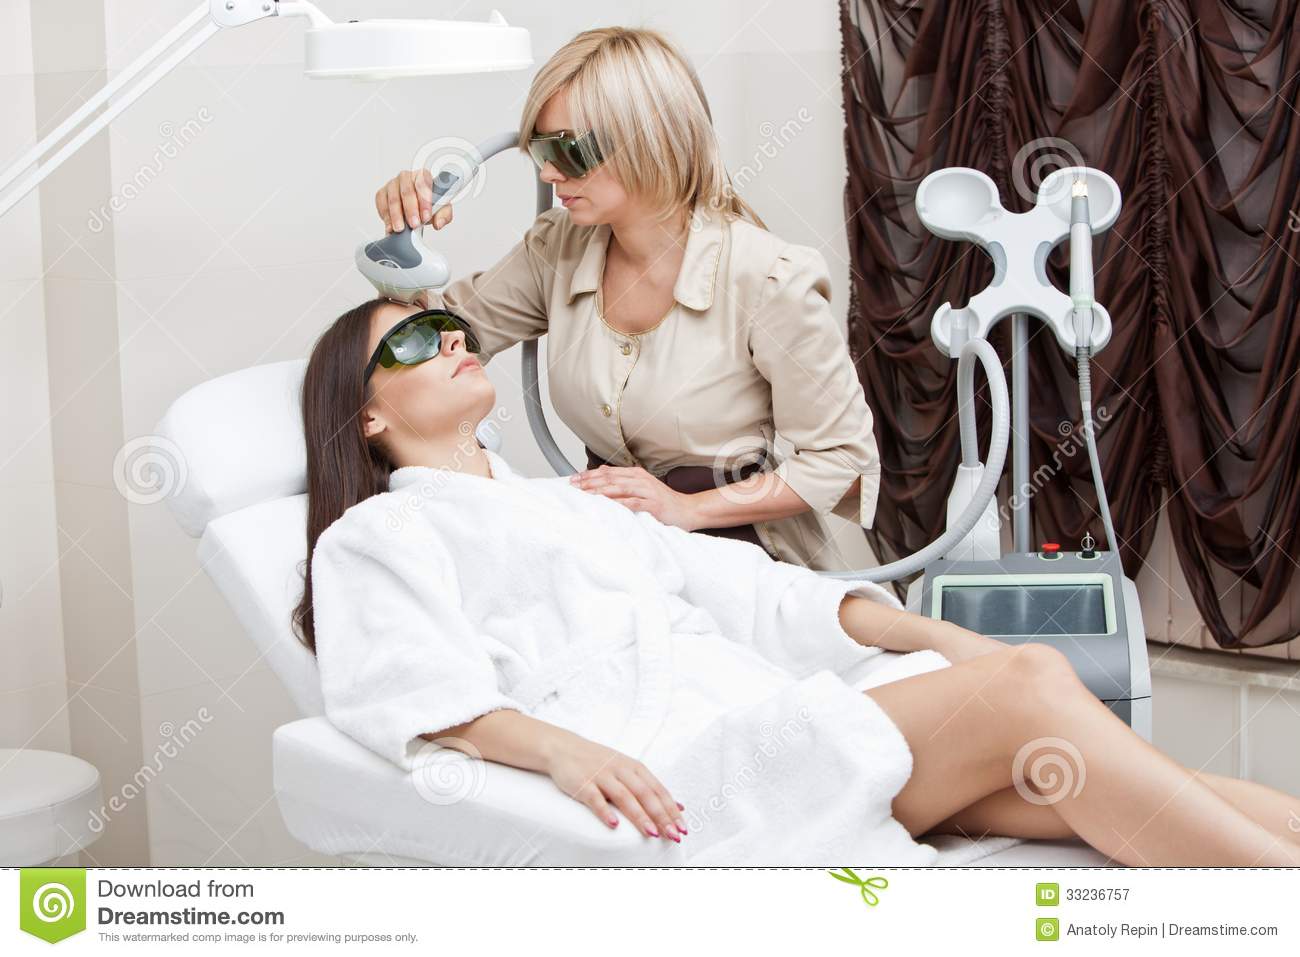 Laser Hair Removal Procedure Royalty Free Stock Photography   Image    